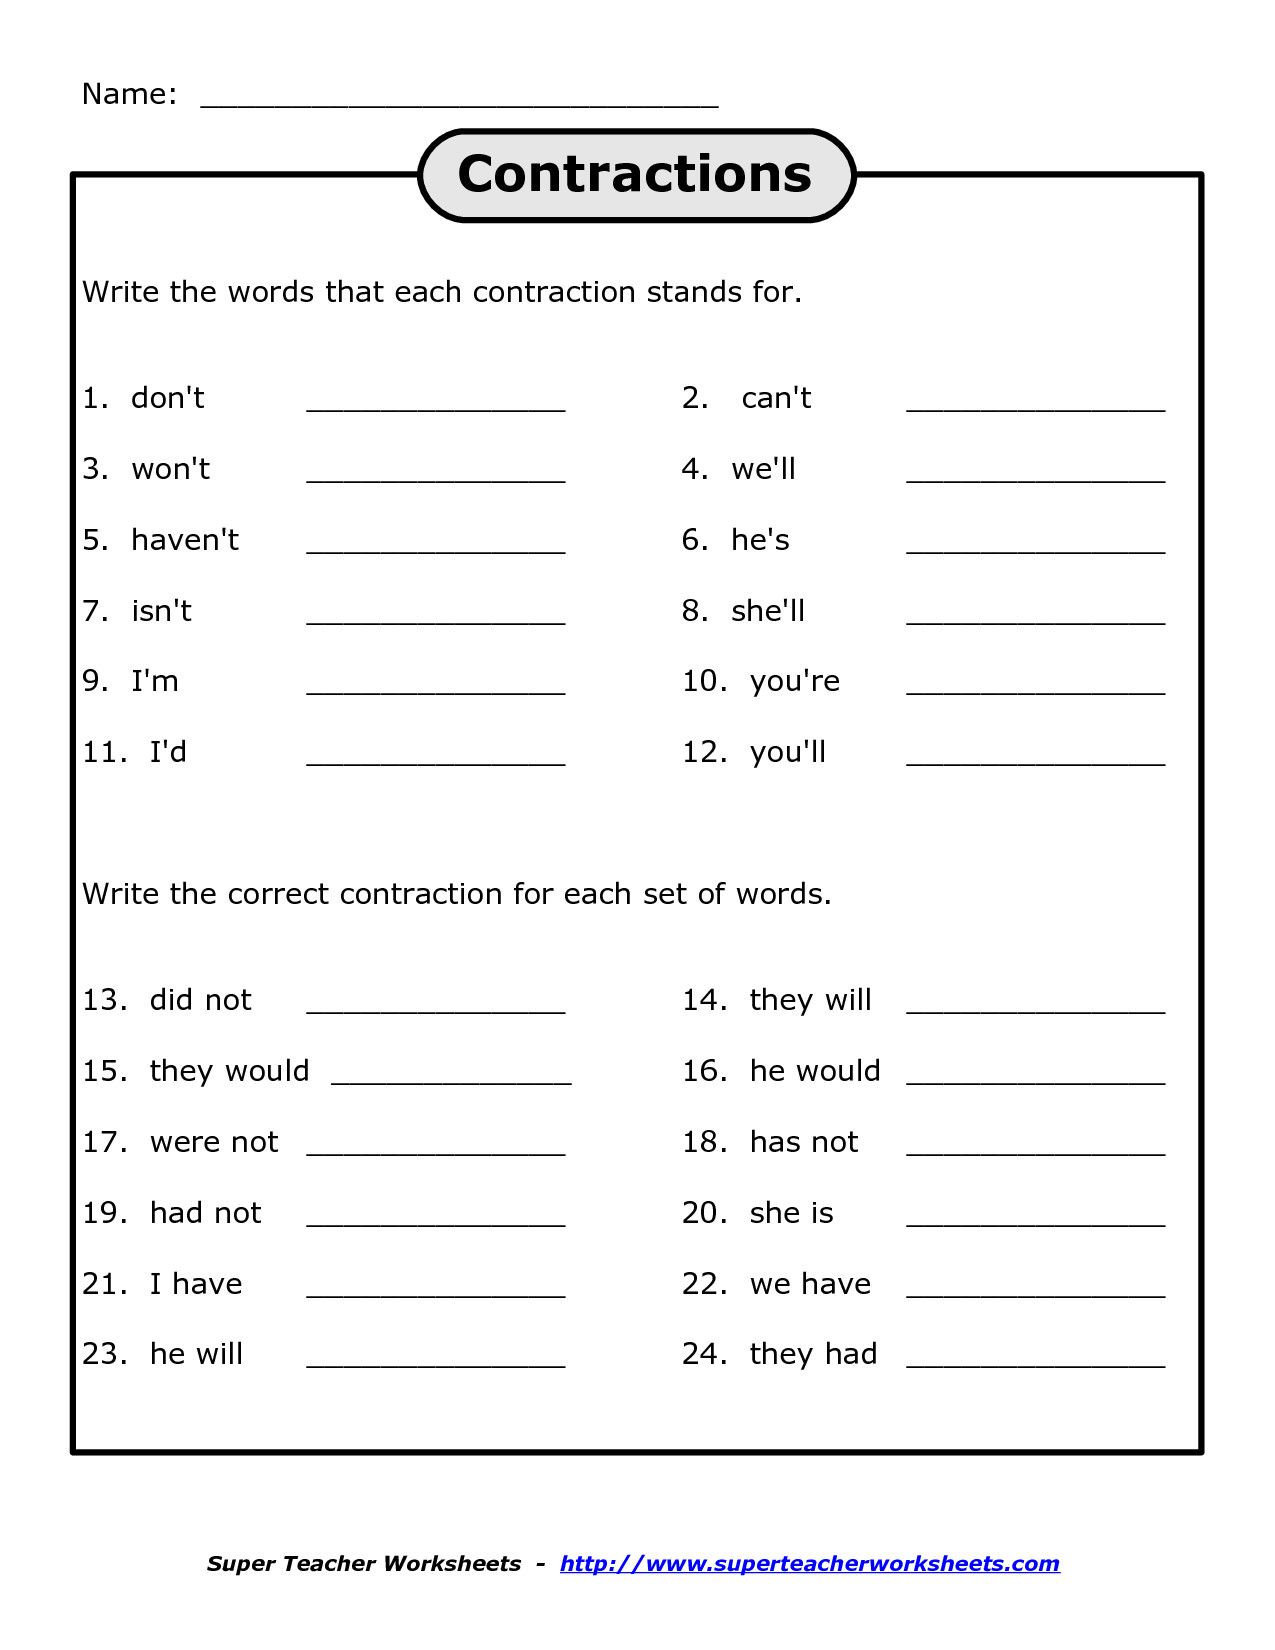 60+ Interactive Contractions Worksheets 3Rd Grade 80